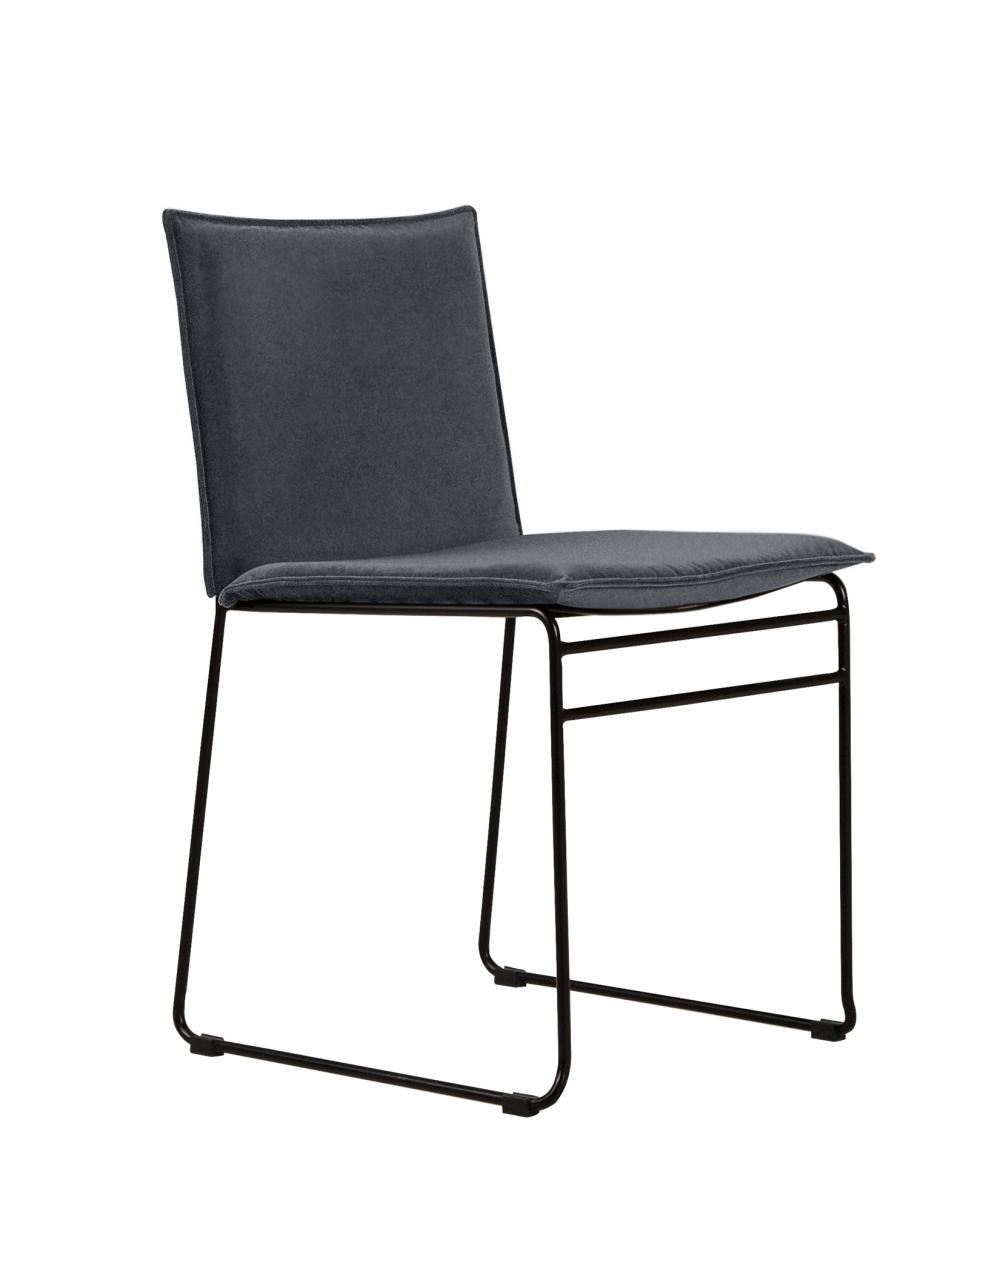 Kyst Dining Chair Outdoor Black Steel Chair Light Grey